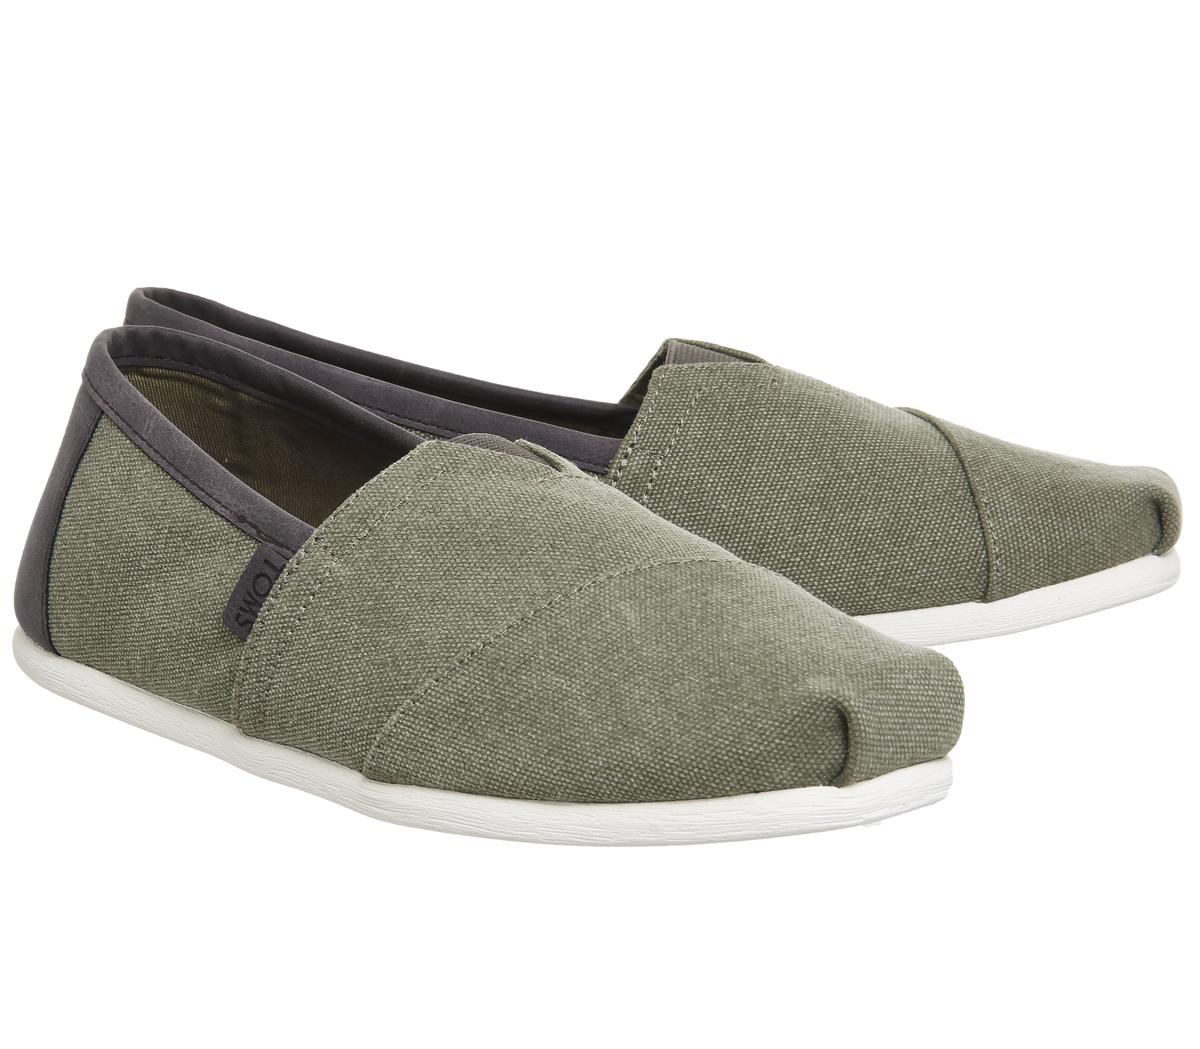 Toms Toms Classic Slip Ons Olive Washed Canvas Trim - Casual